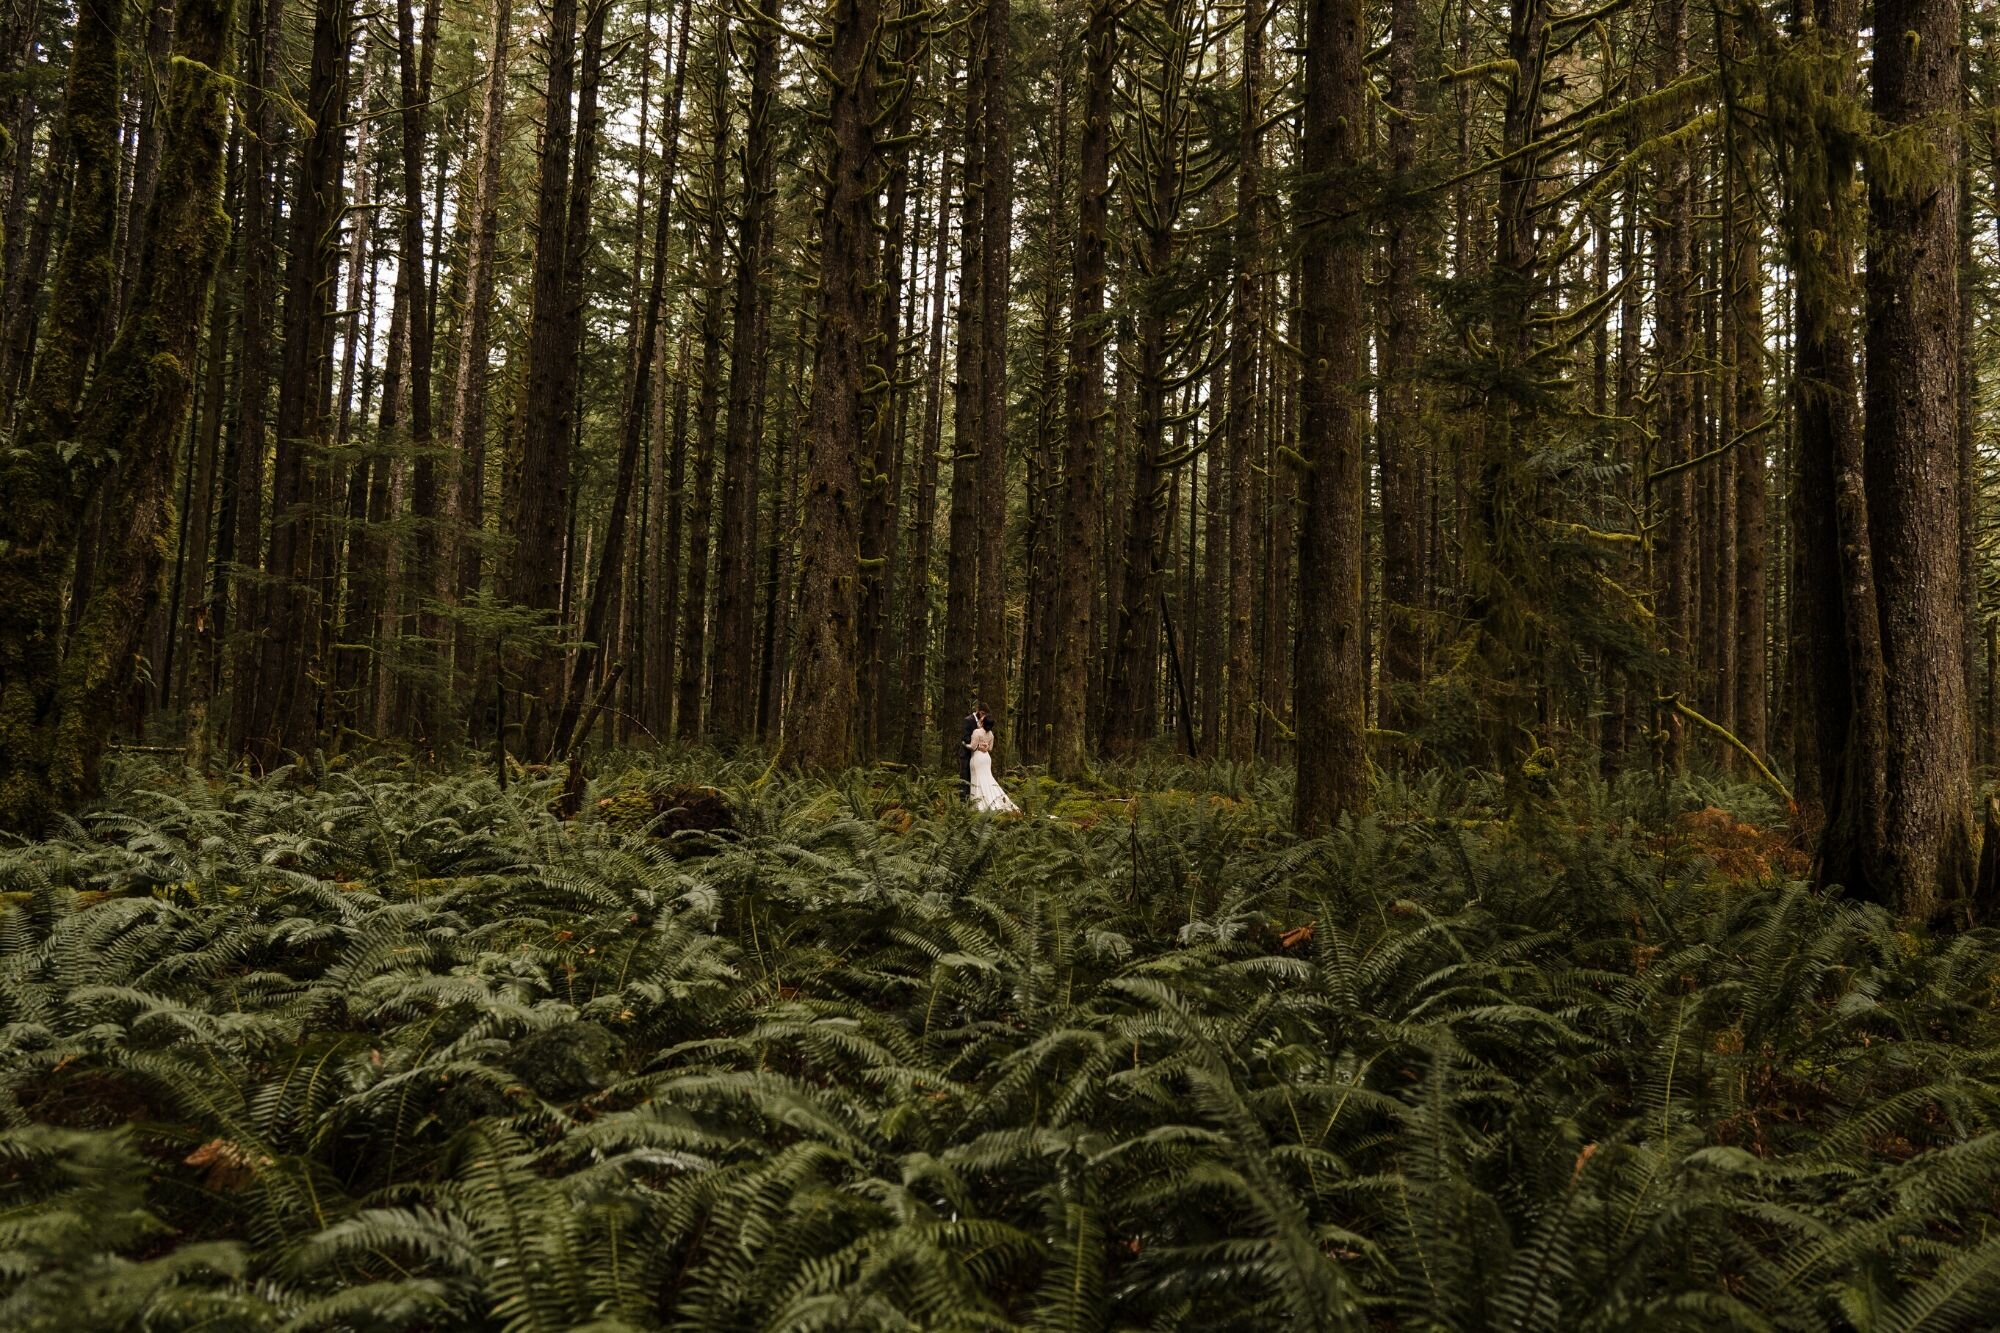 Snoqualmie Valley Intimate Forest Elopement | Between the Pine Adventure Elopement Photography